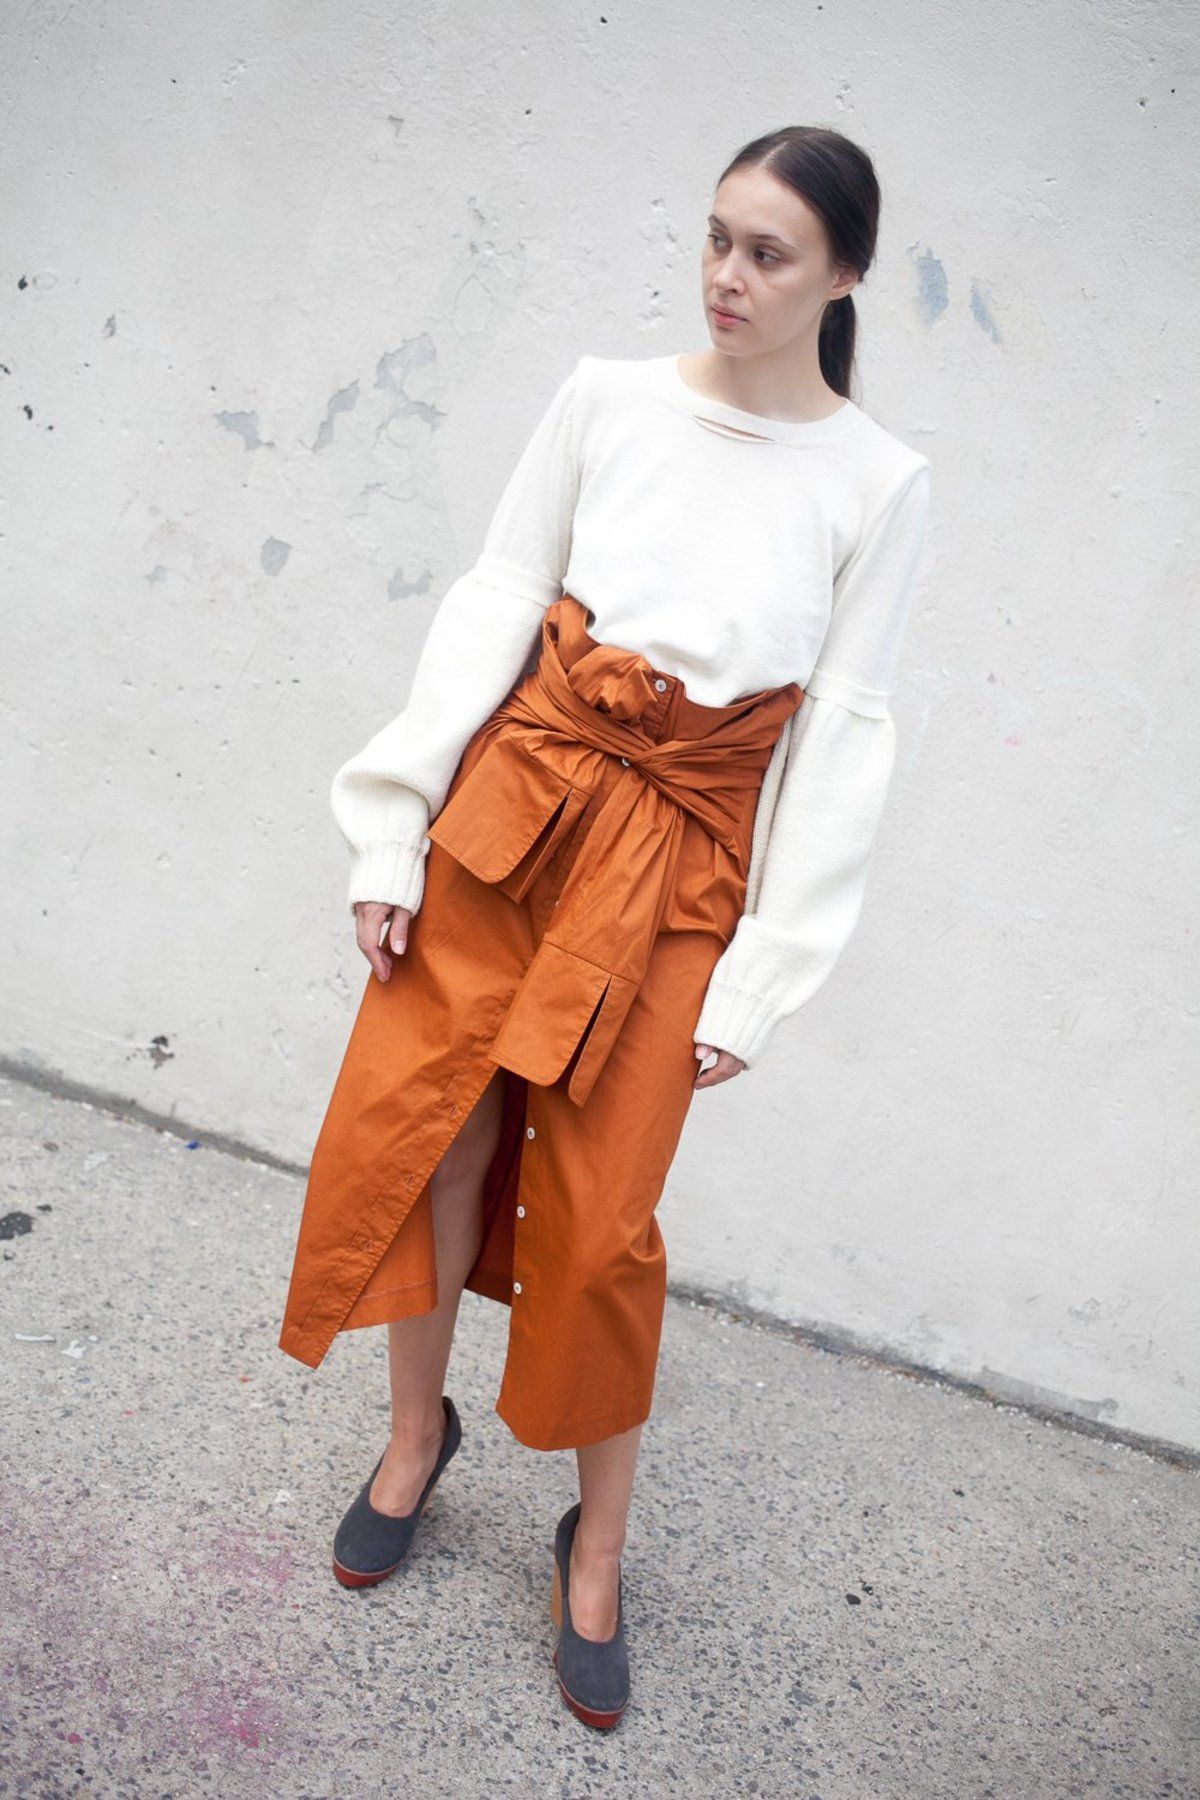 Statement Skirts For Fall-Winter